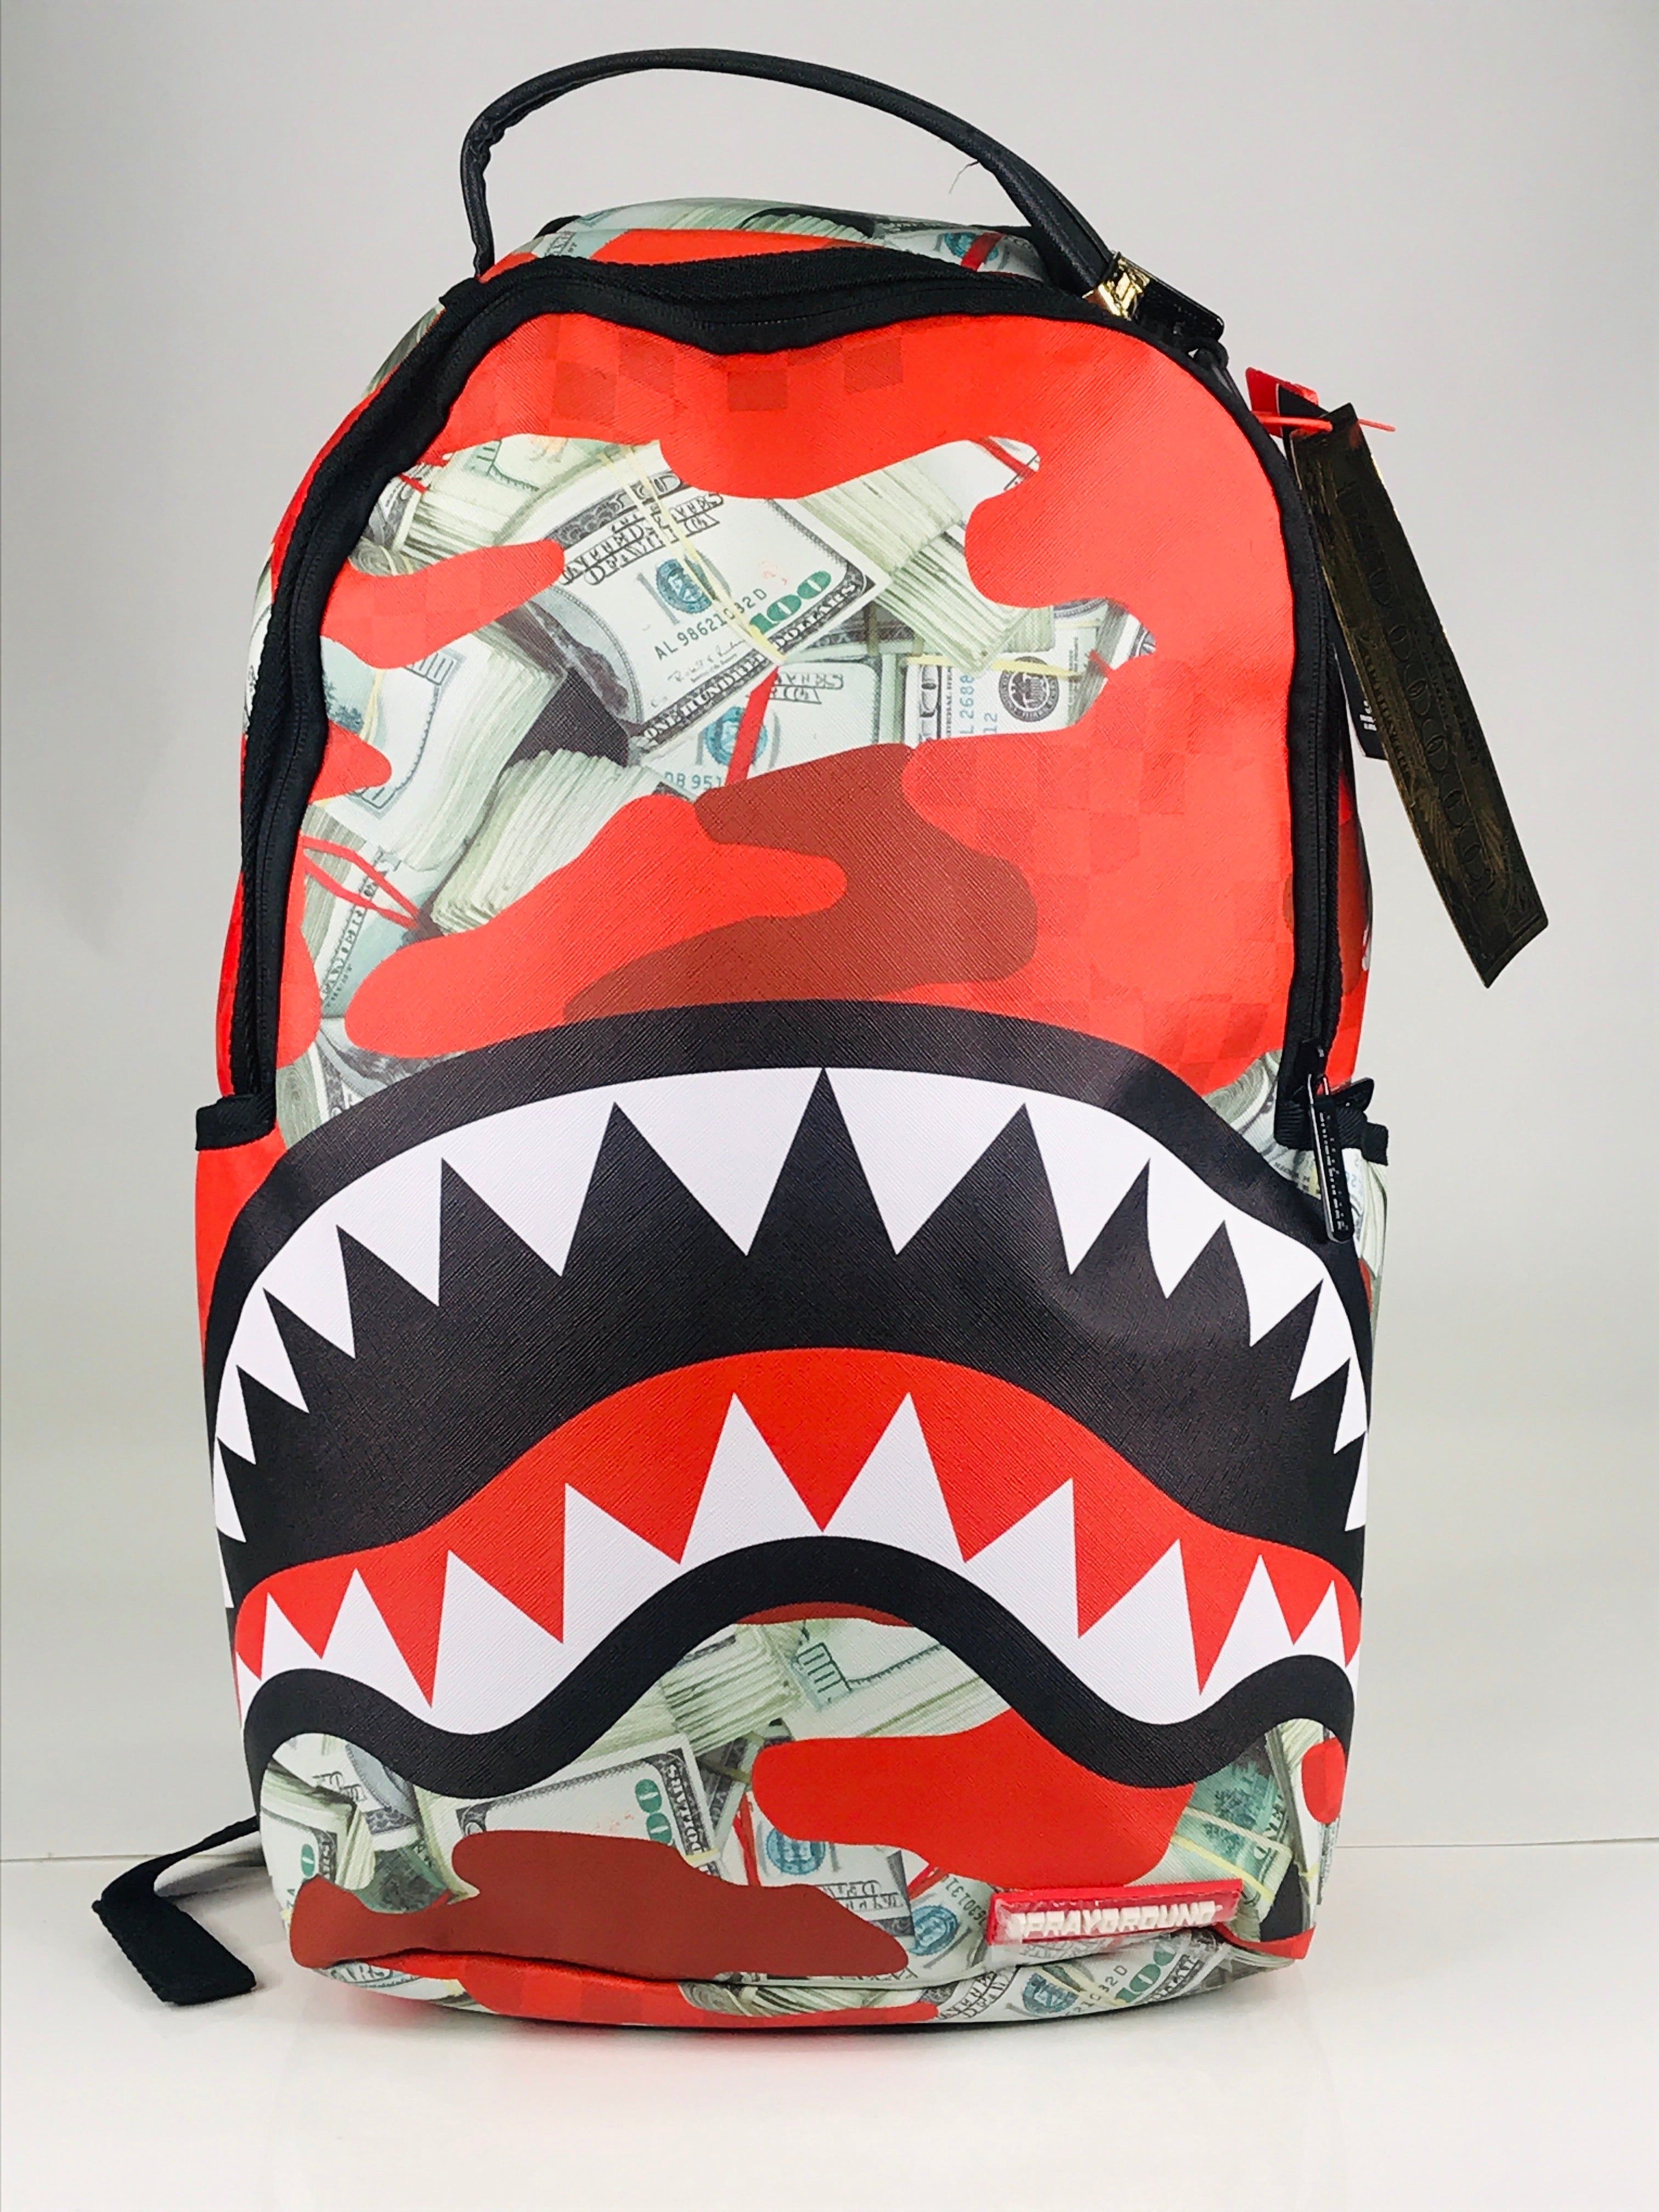 Sprayground 500 Euros Banned Backpack for Sale in Modesto, CA